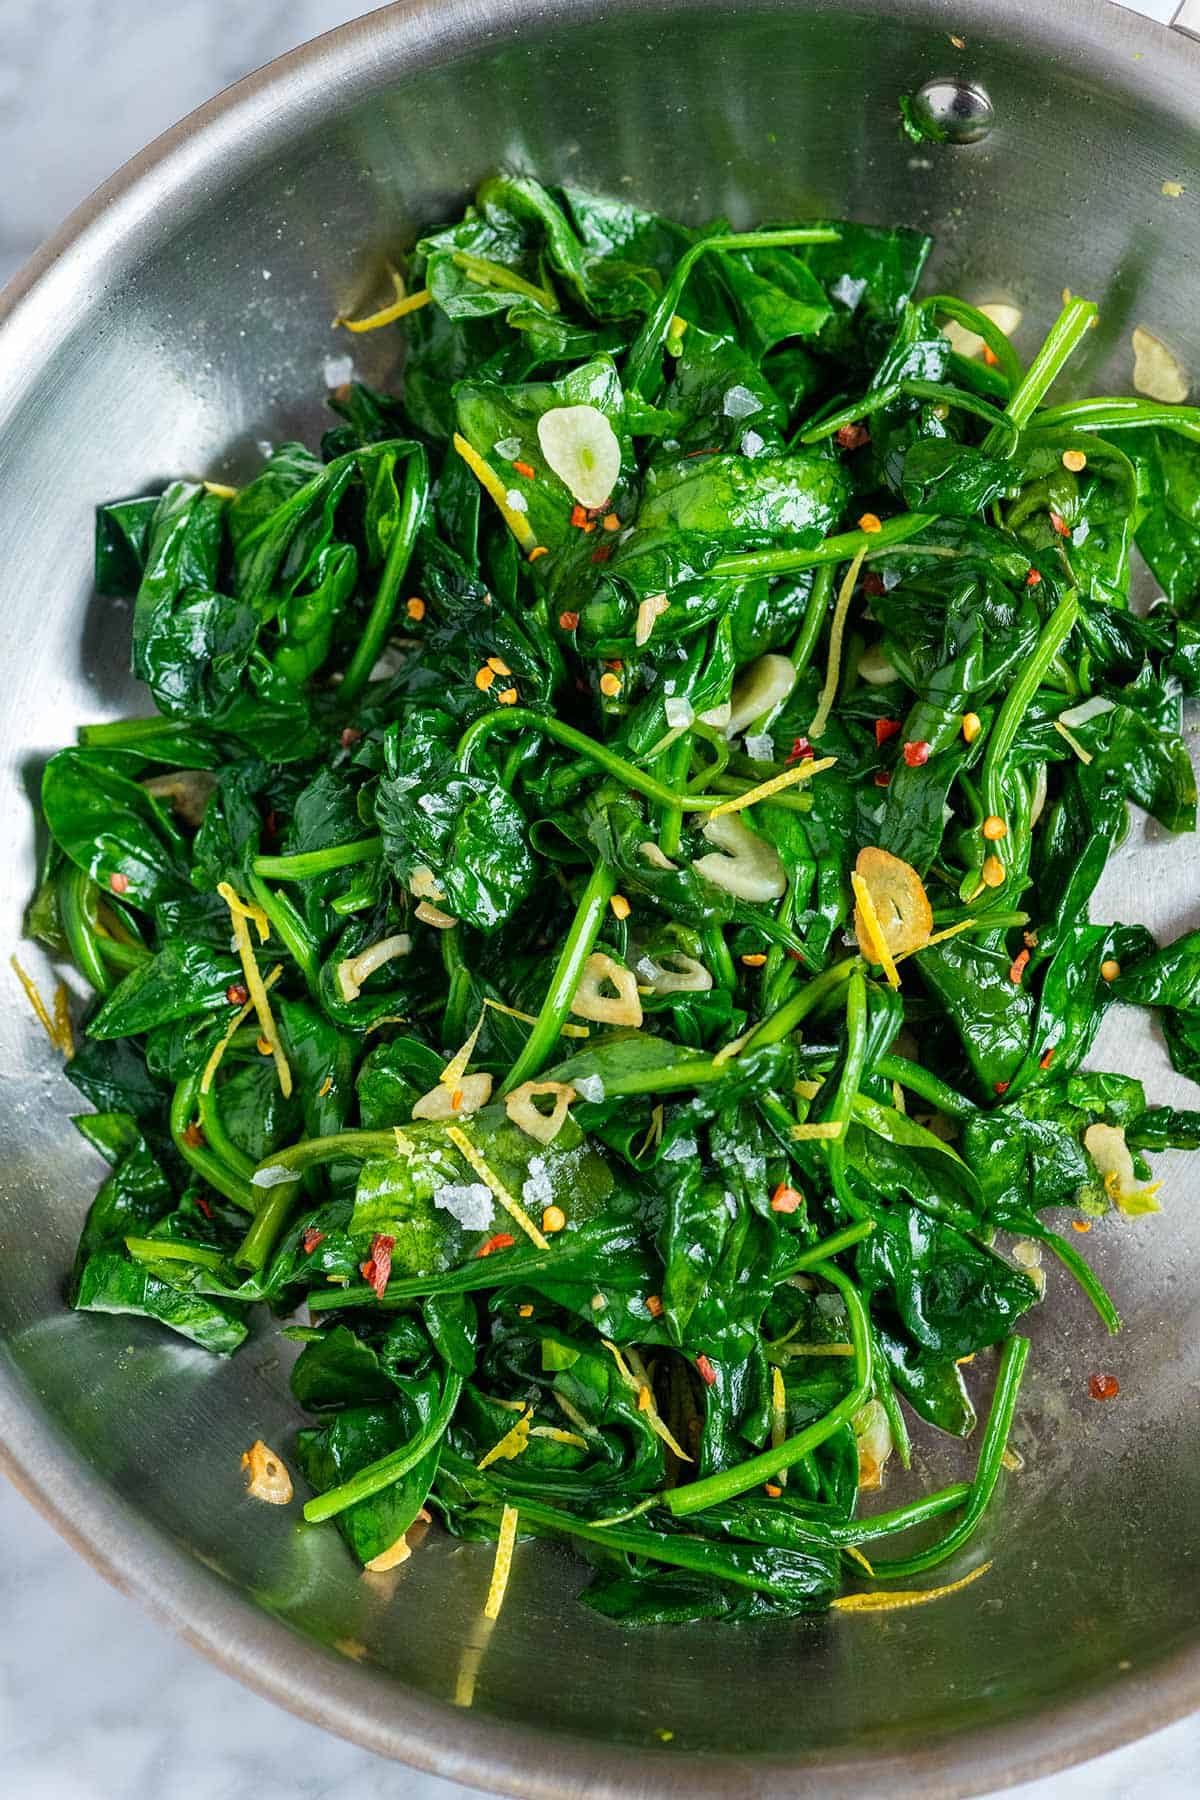 A skillet of sautéed spinach with garlic.